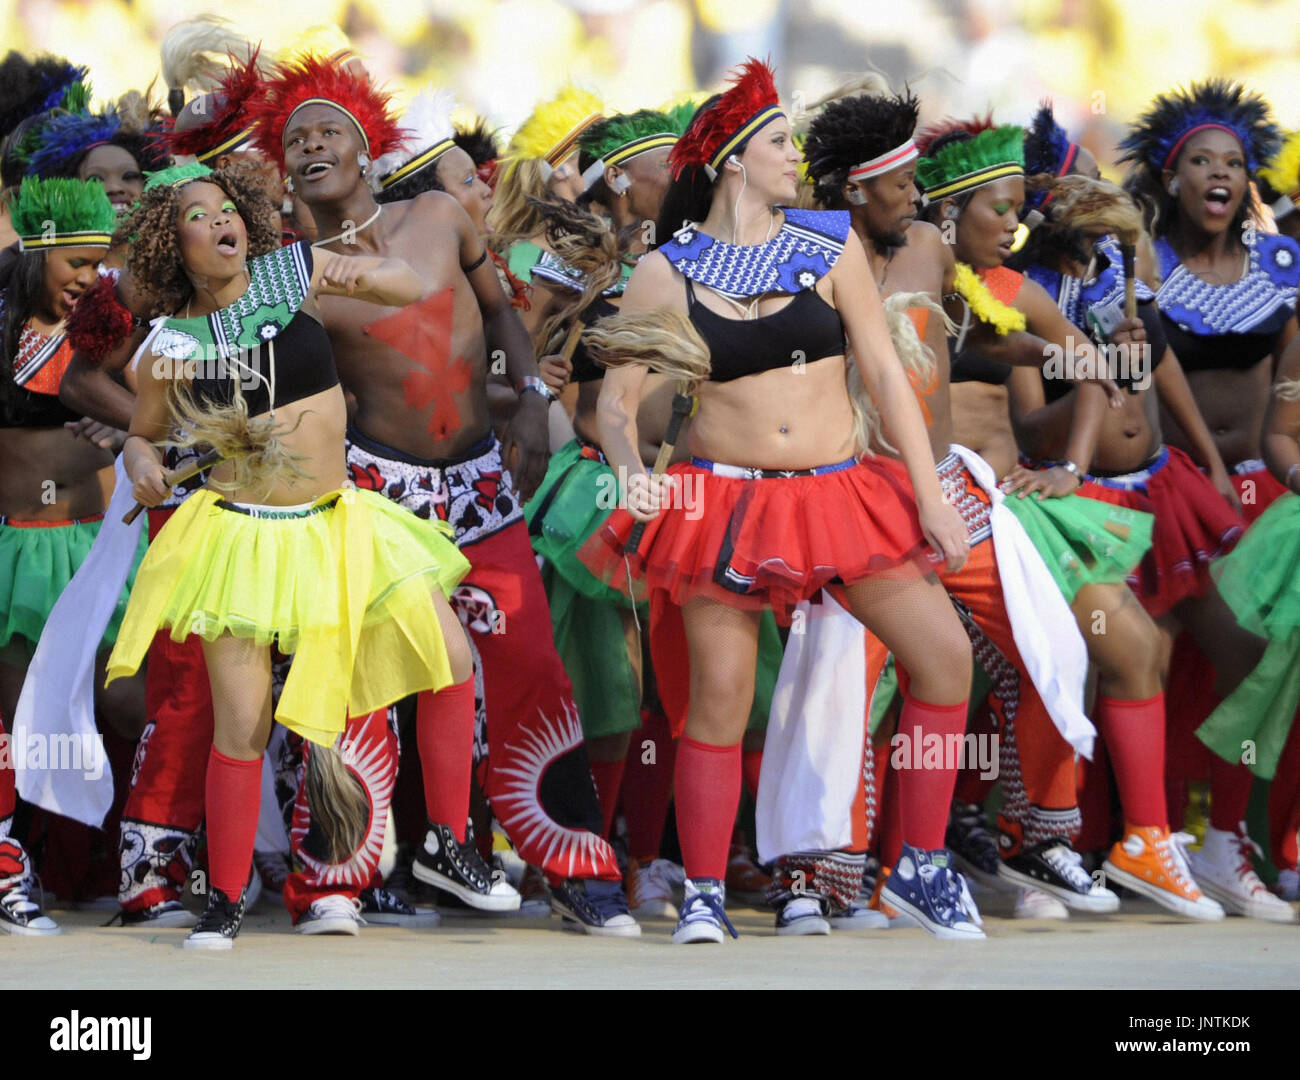 JOHANNESBURG, South Africa - Performers dance during the opening ...